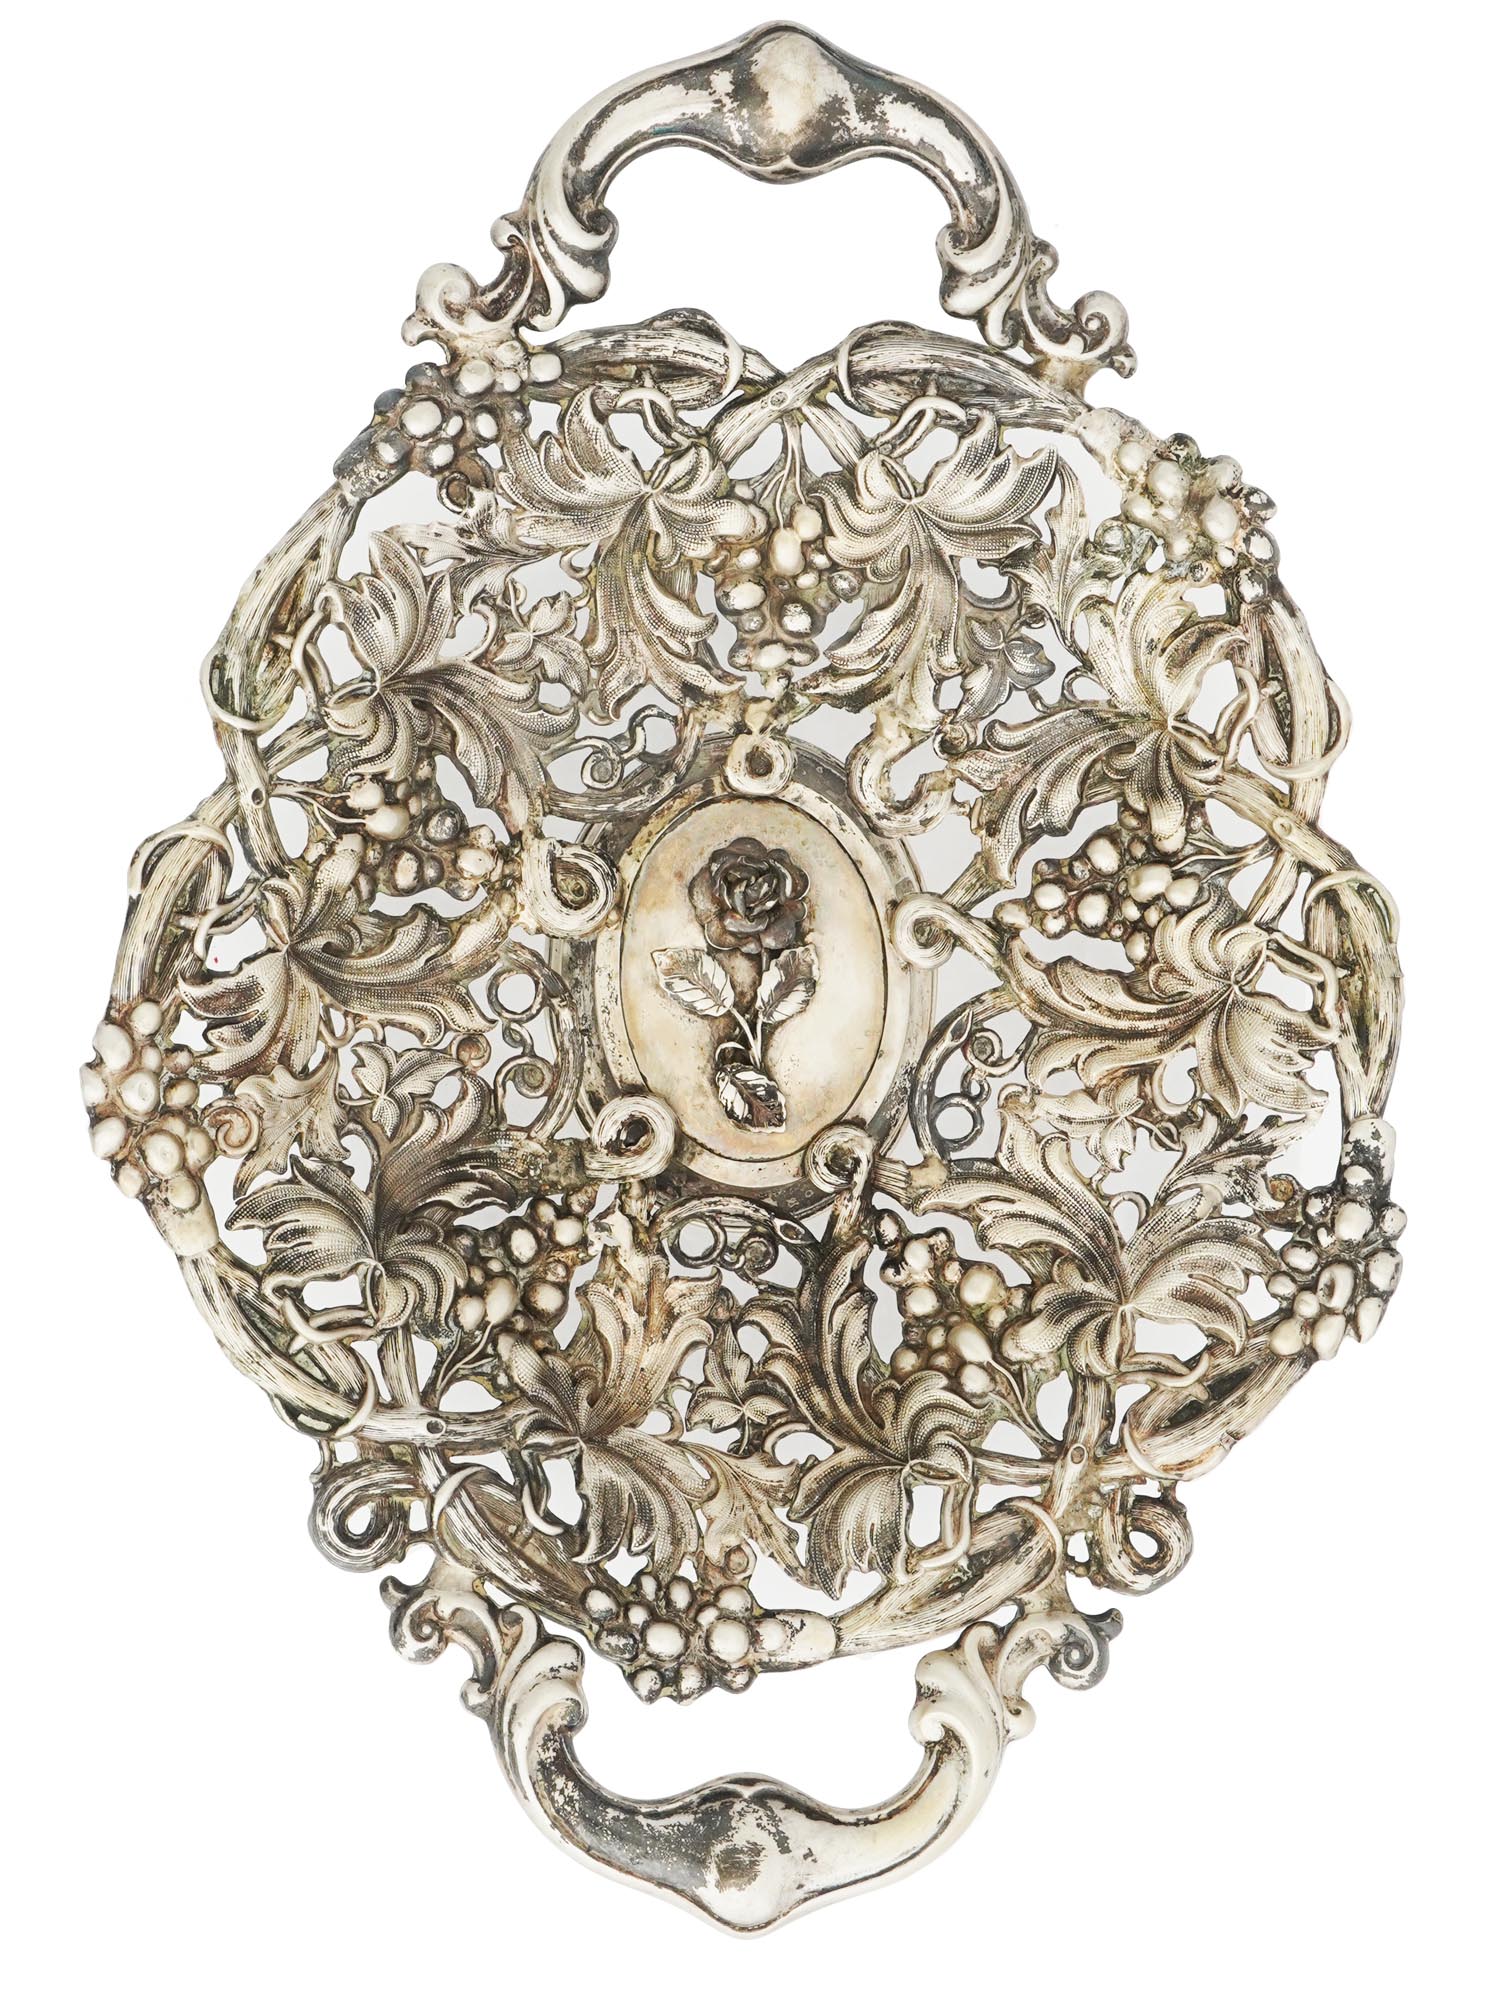 RUSSIAN SILVER GRAPEVINE EMBOSSED FRUIT BASKET PIC-0